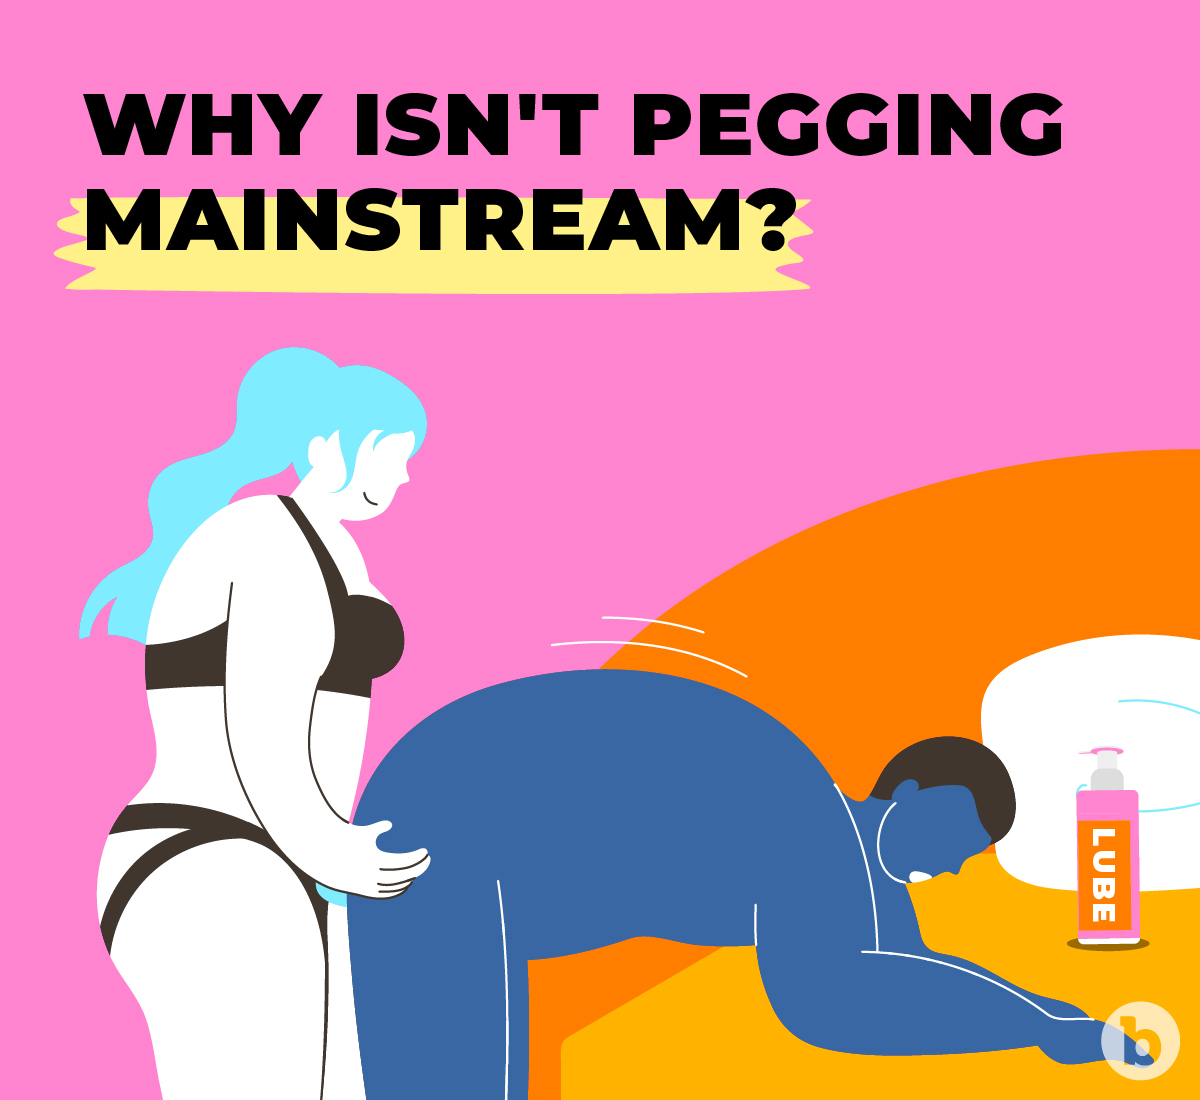 The stigma around anal play has hindered pegging from going mainstream